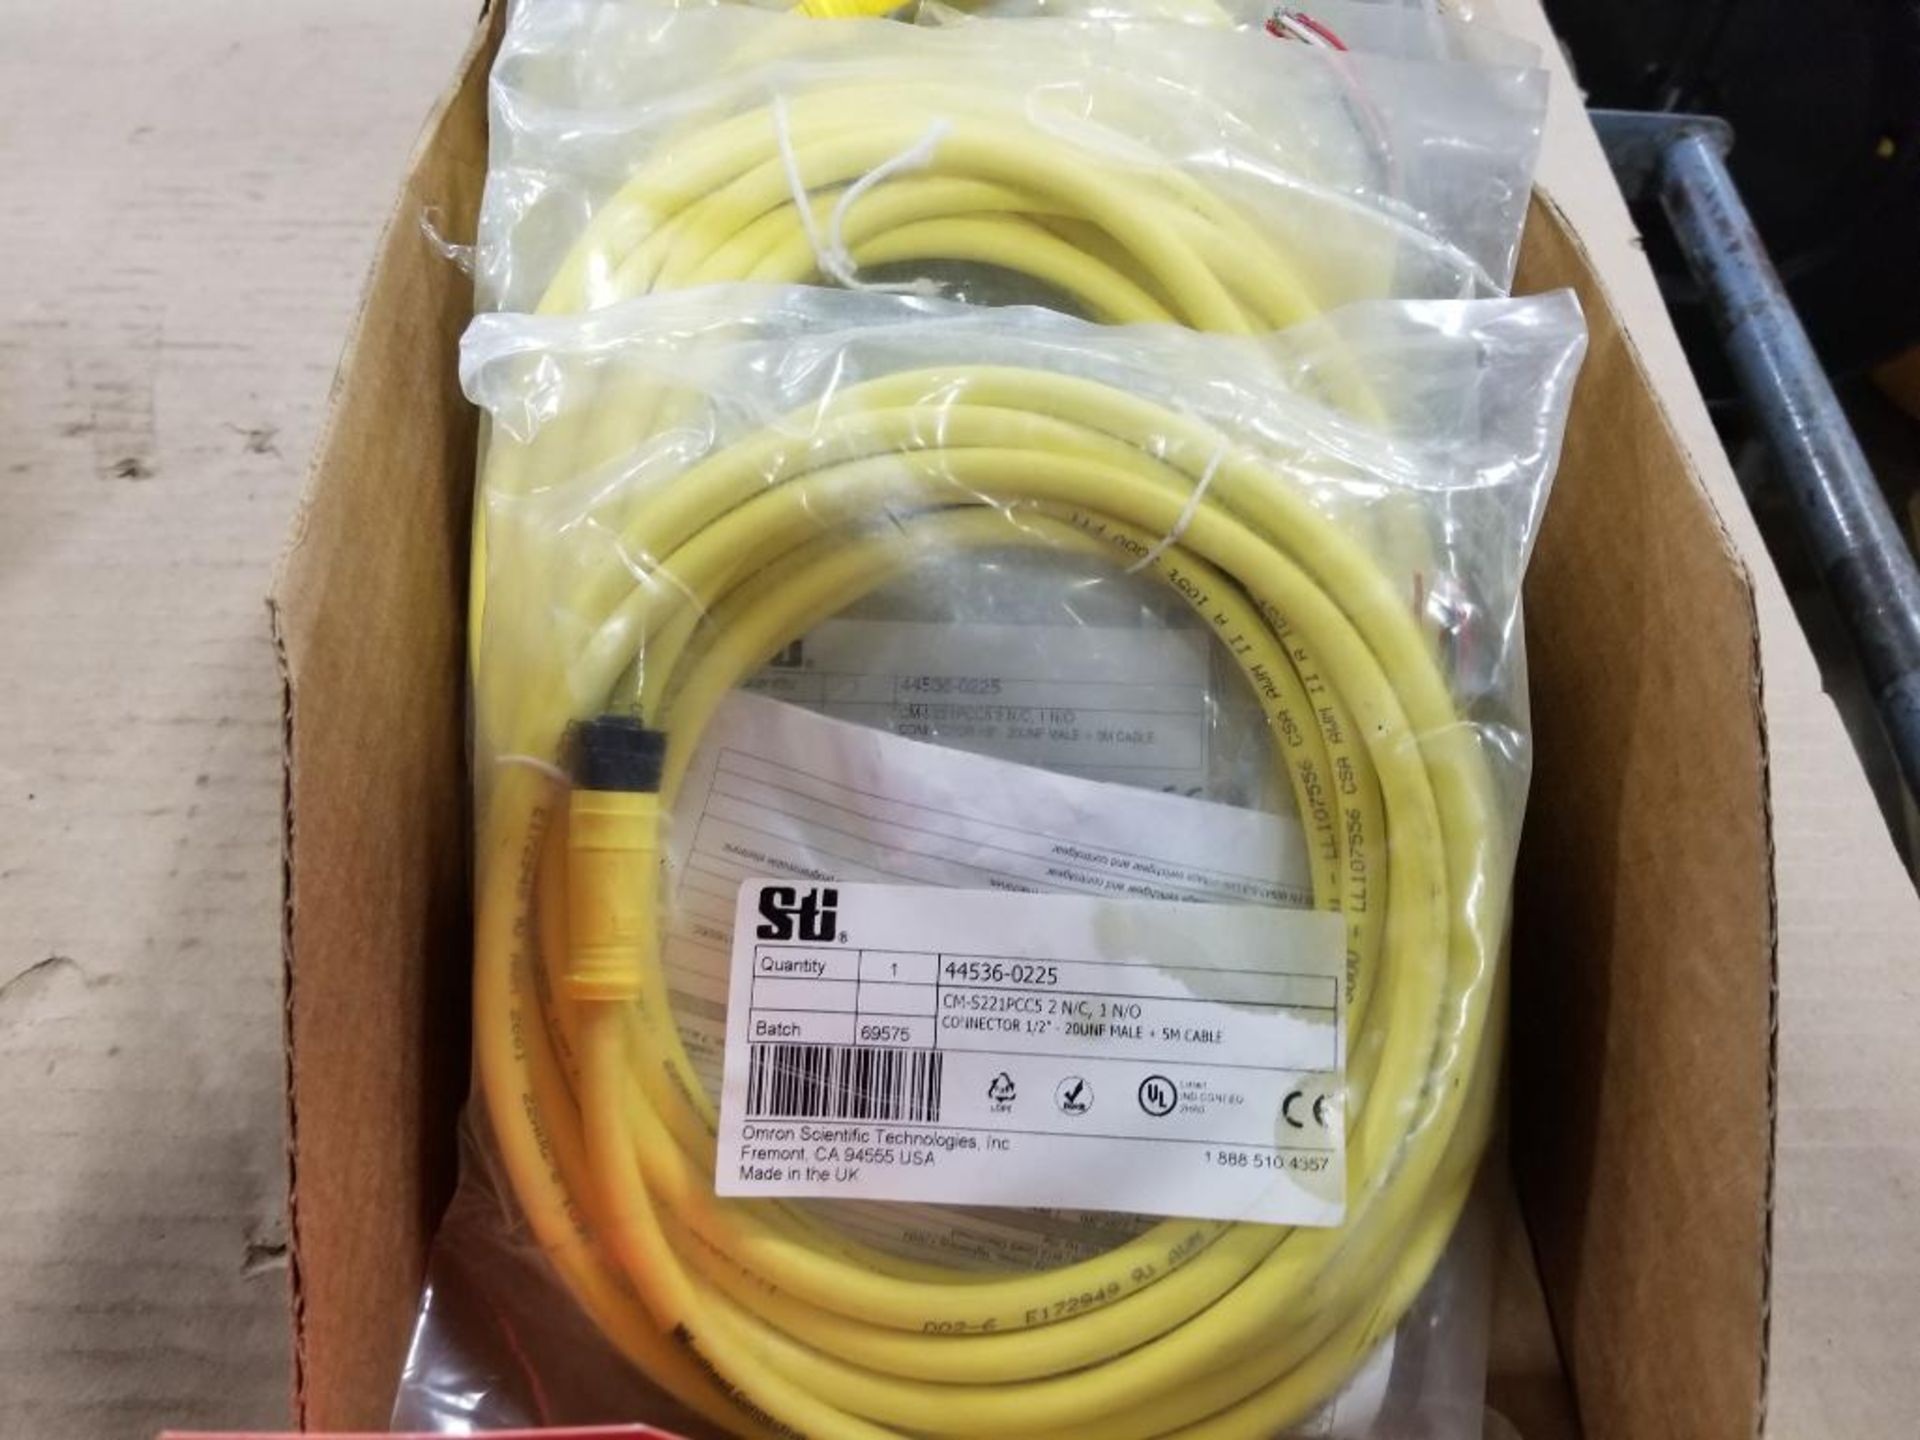 Qty 3 - STI 44536-0225 cordset. New in package.